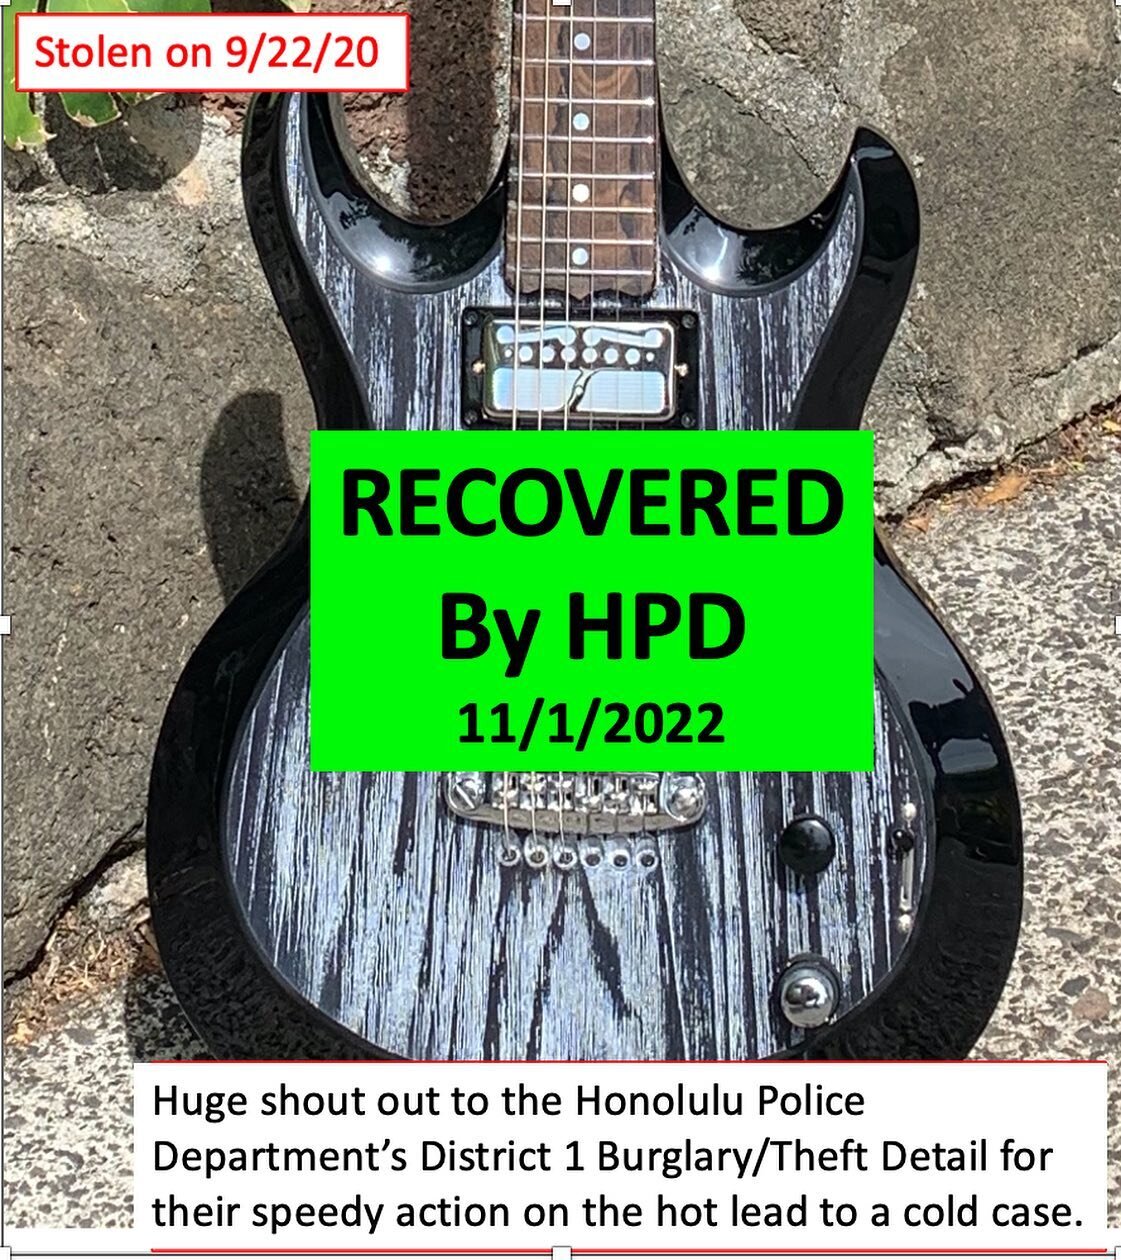 Homecoming Queen makes it home safely. After being kidnapped for 2yrs she finally made it home.  She is resting comfortably and is expected a full recovery.  Thank you to the Honolulu Police Department&rsquo;s District 1 Burglary/Theft Detail for the